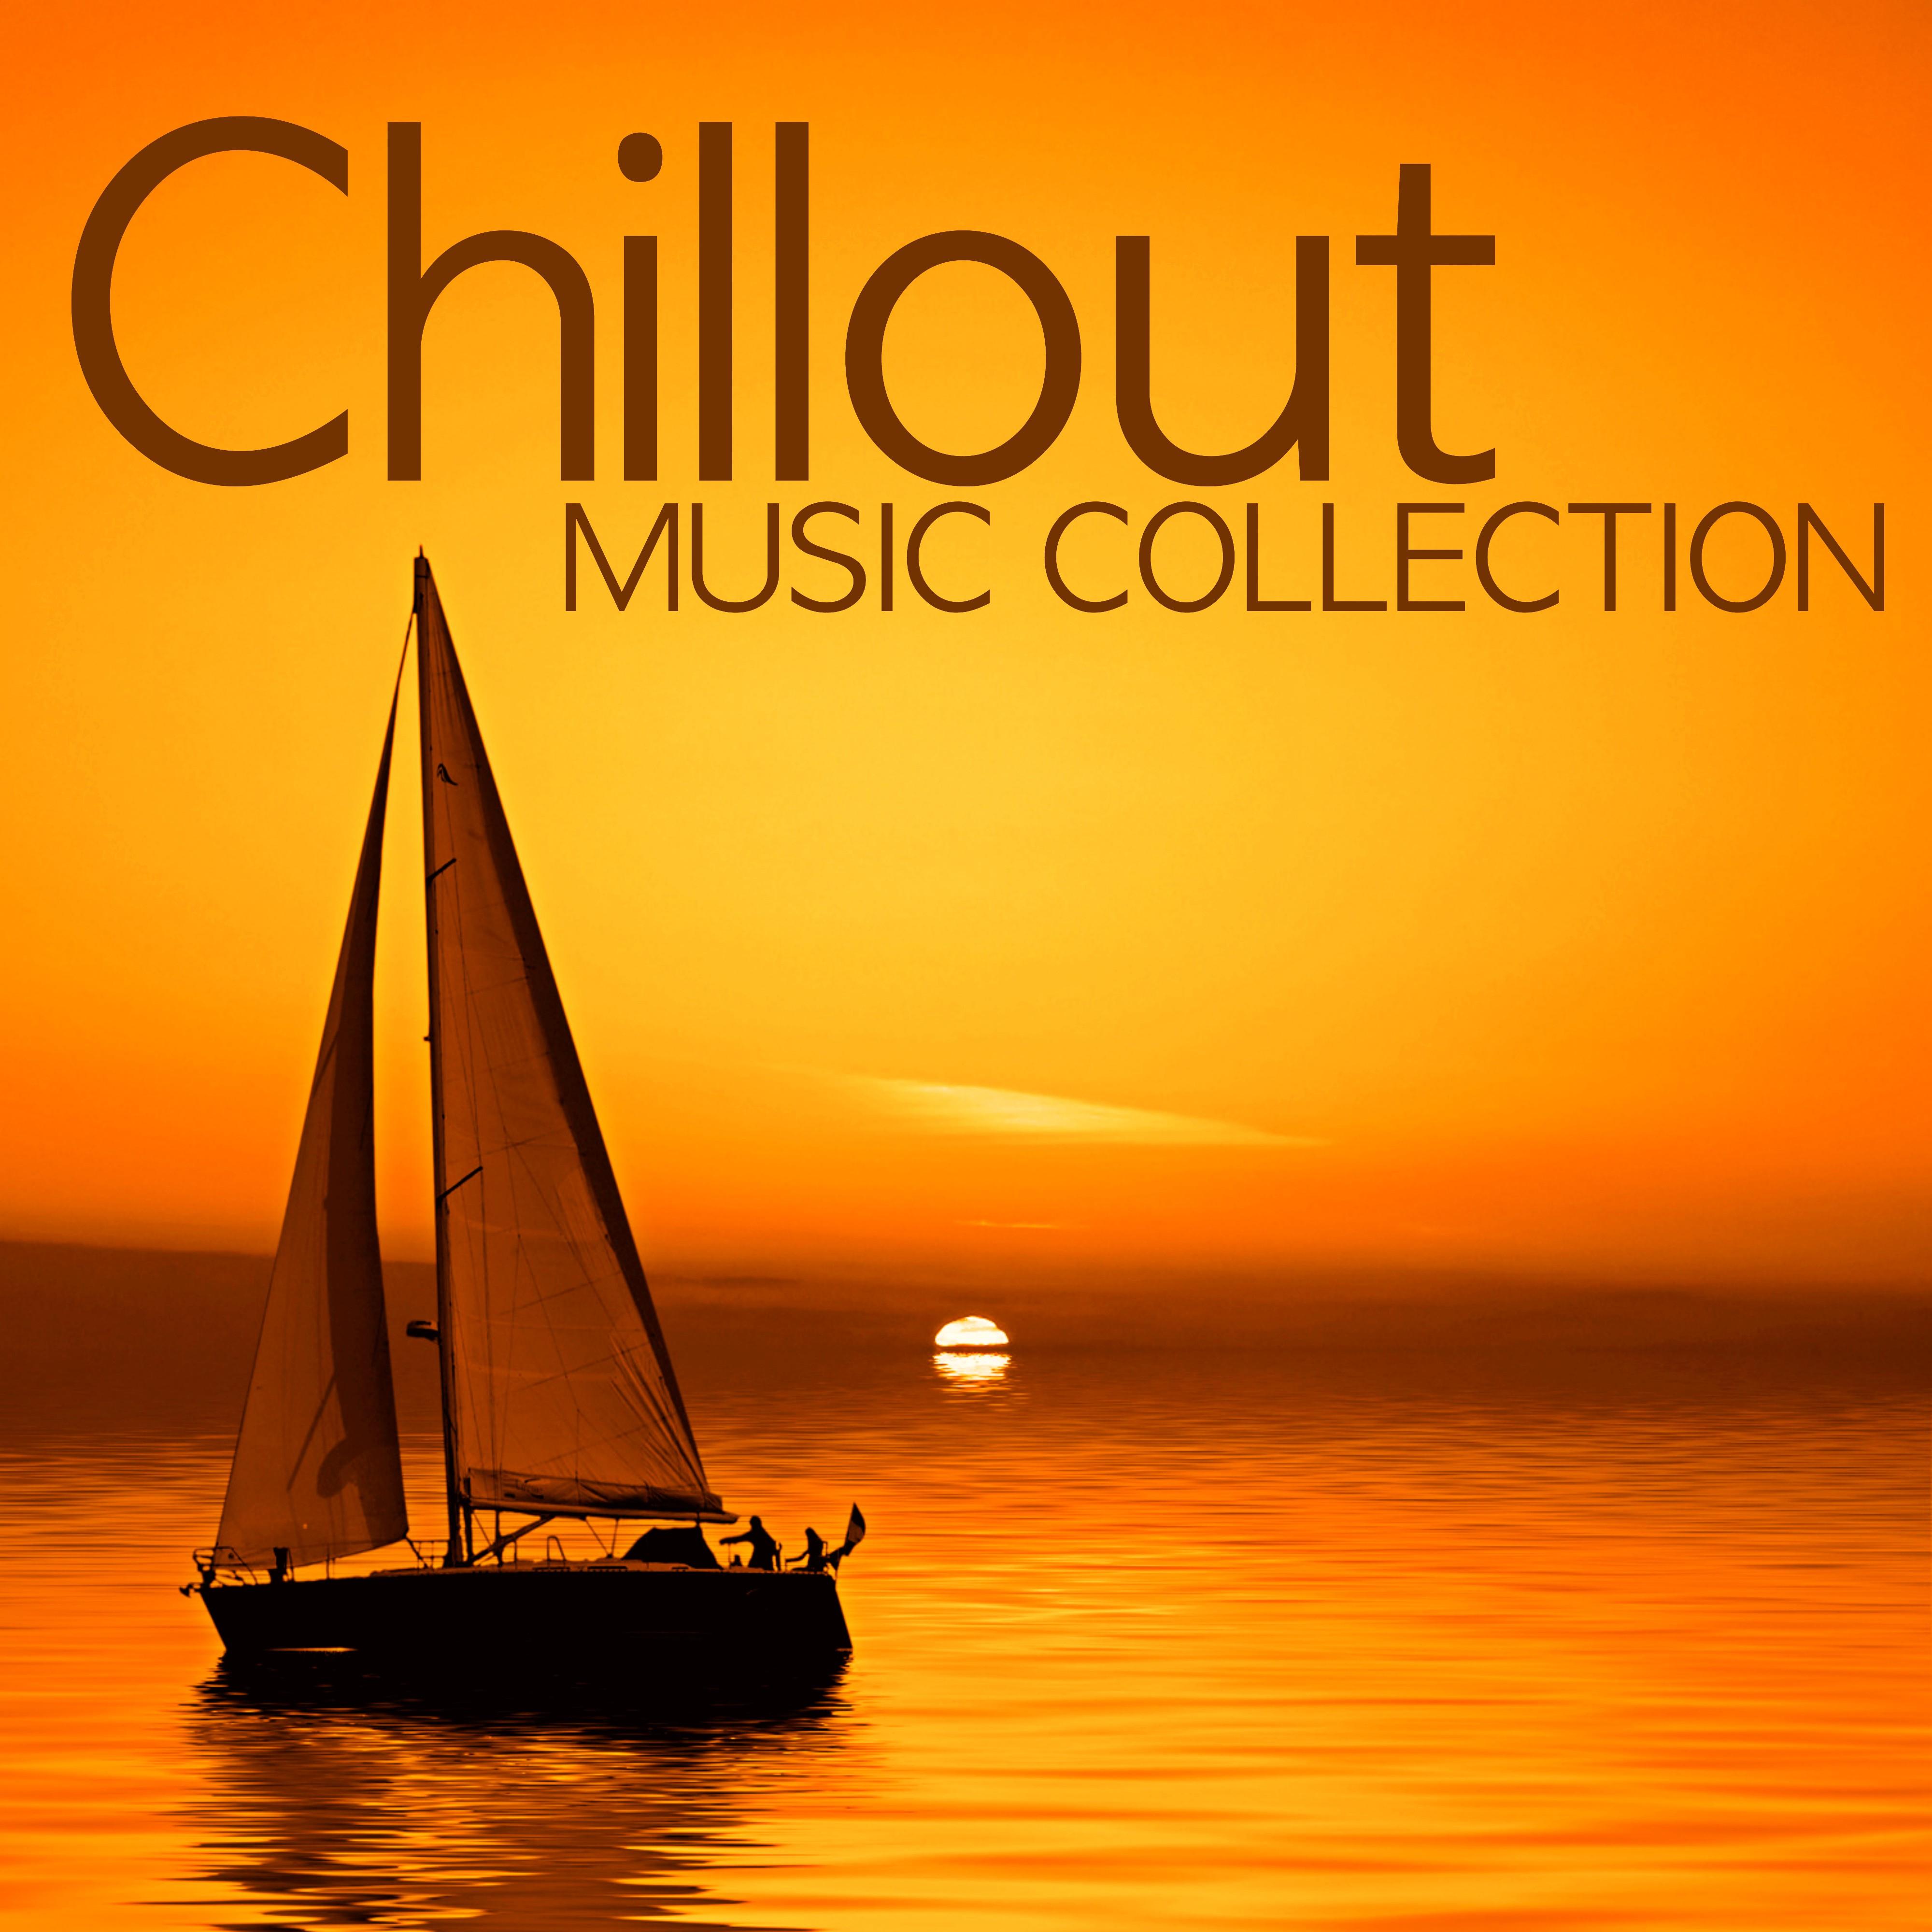 Chillout Music Collection - Lounge Music Bar, Piano, Sax and Guitar, **** Jazzy Music